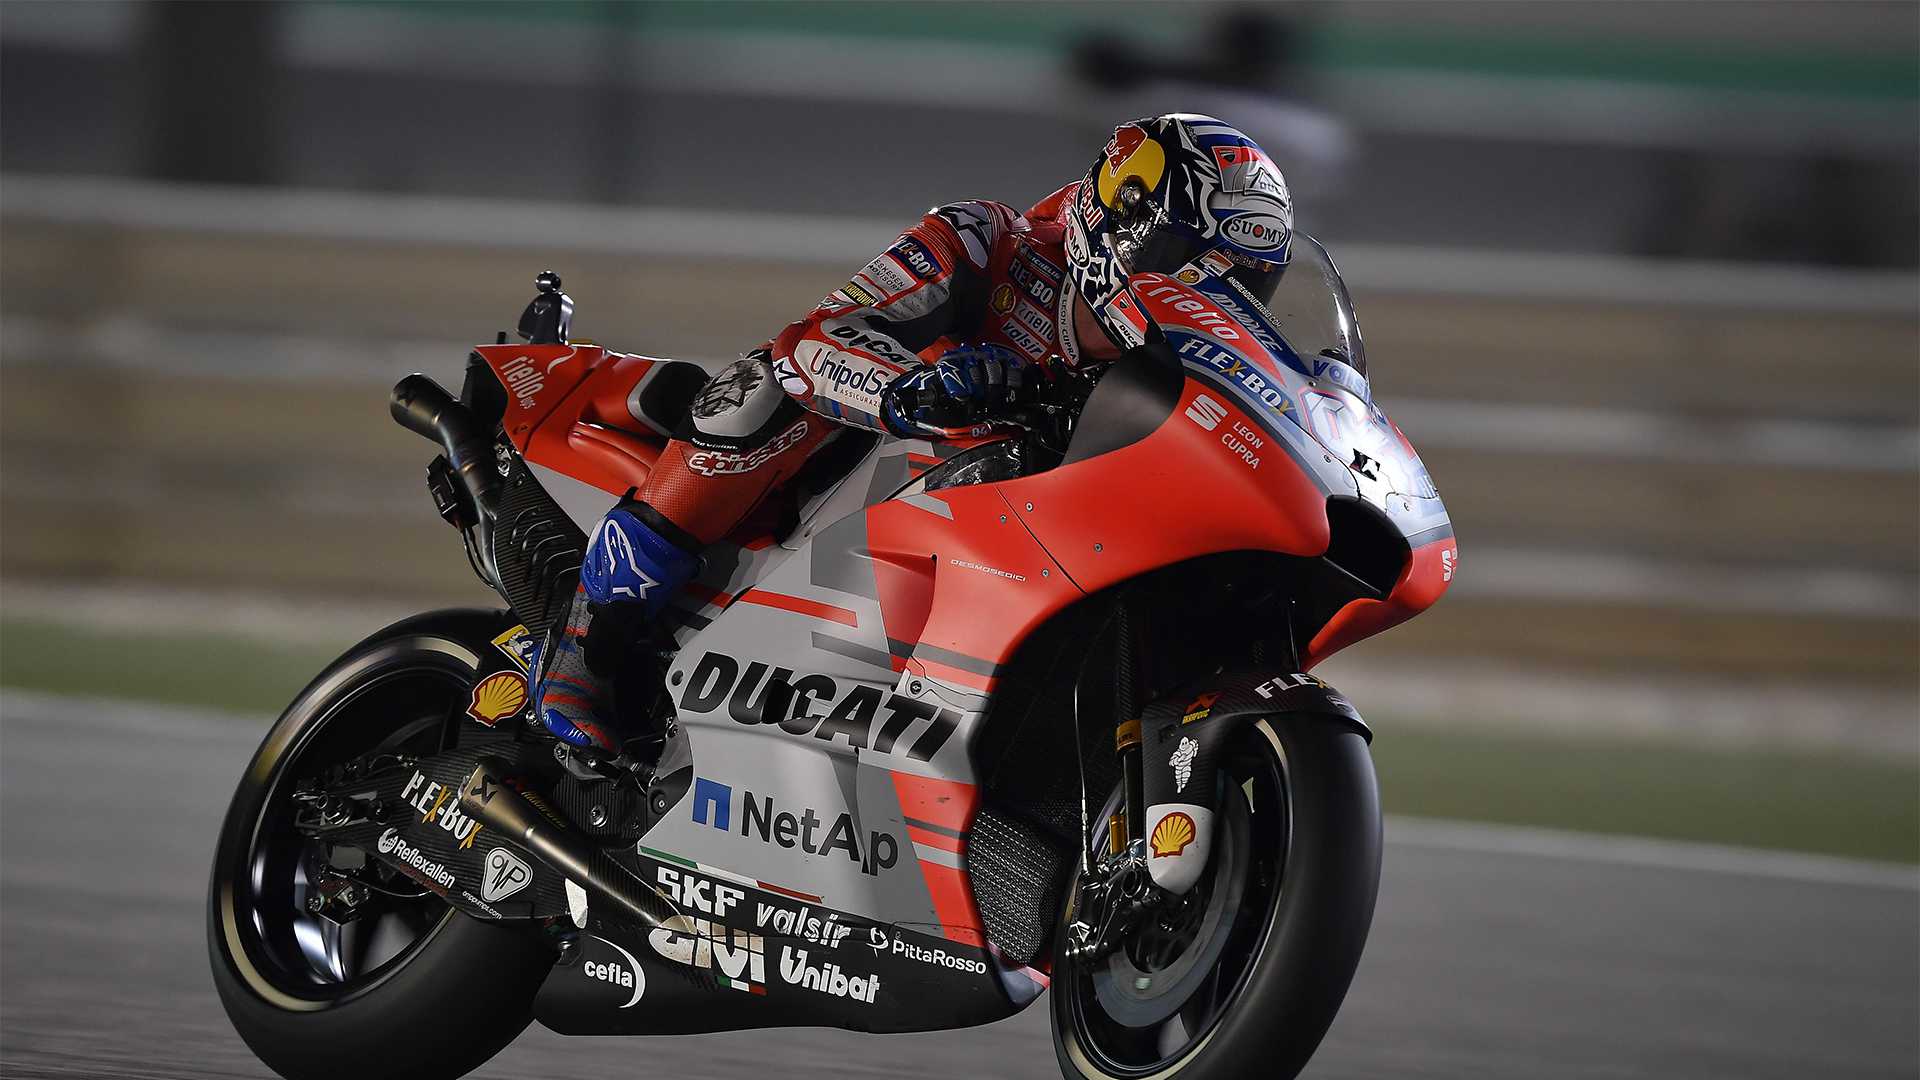 Game on: Dovi vs Marquez lights the fuse at Lusail